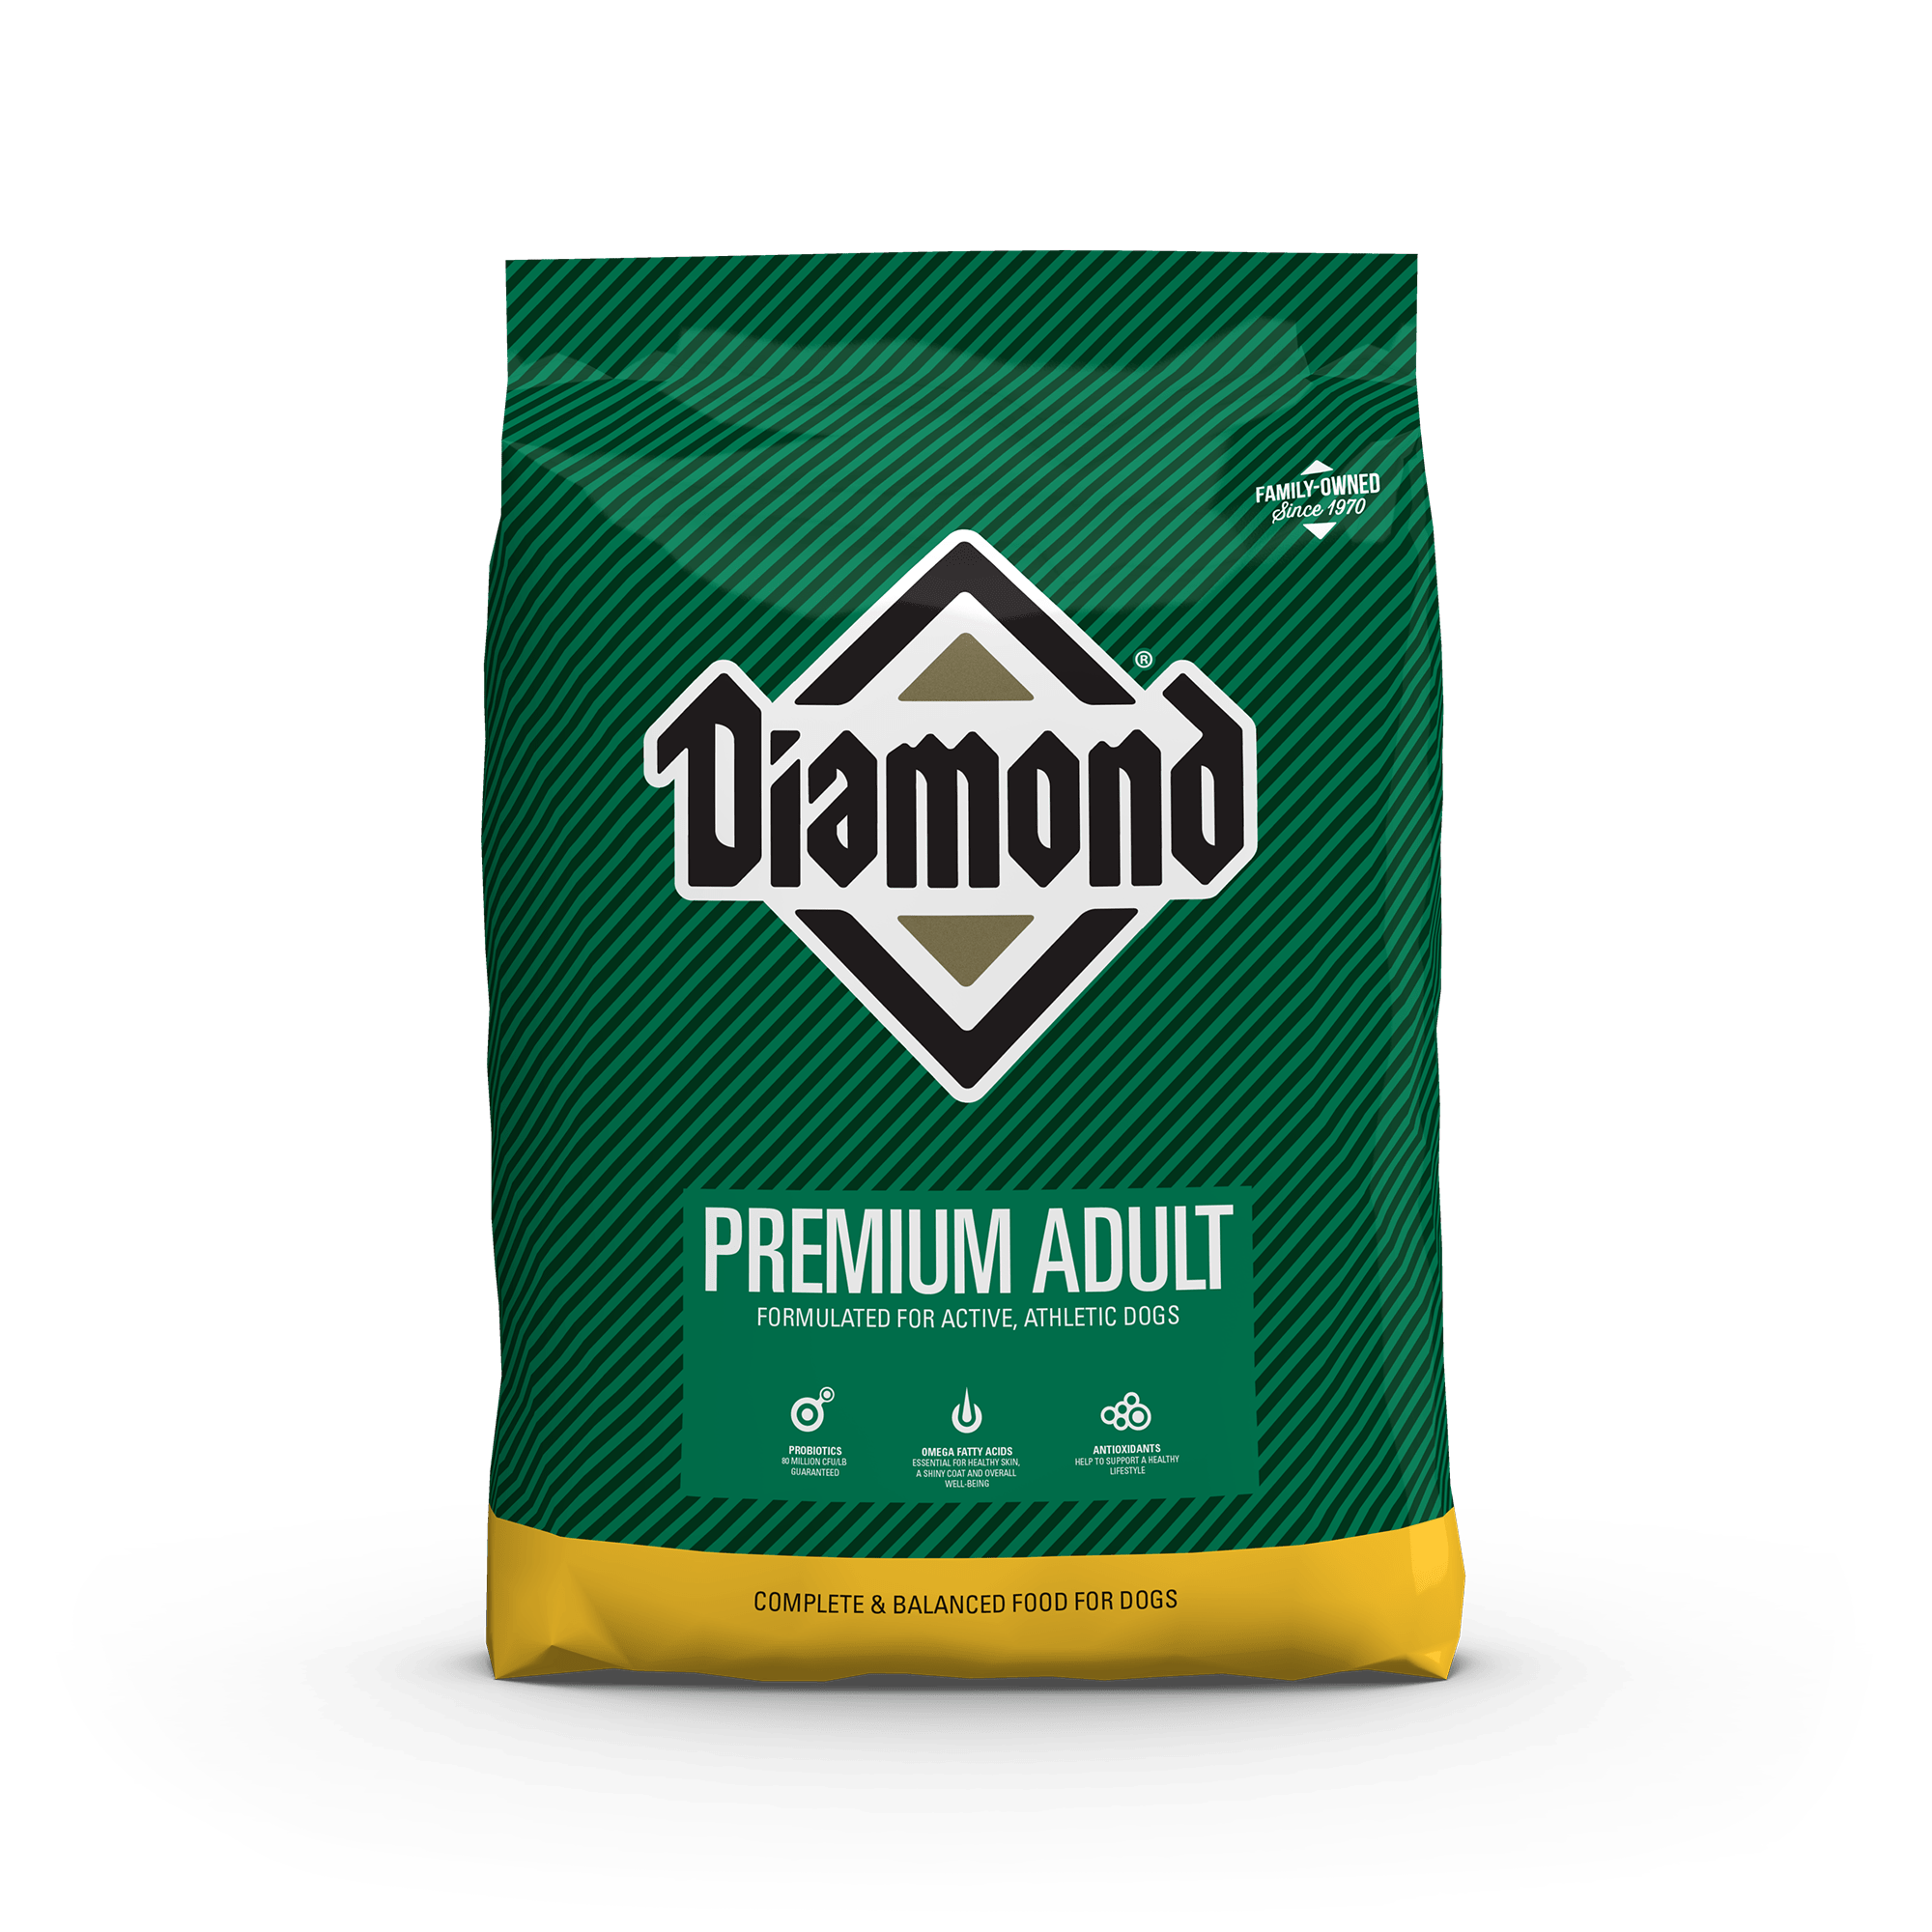 Diamond Premium All Life Stages Formula for Dogs product packaging